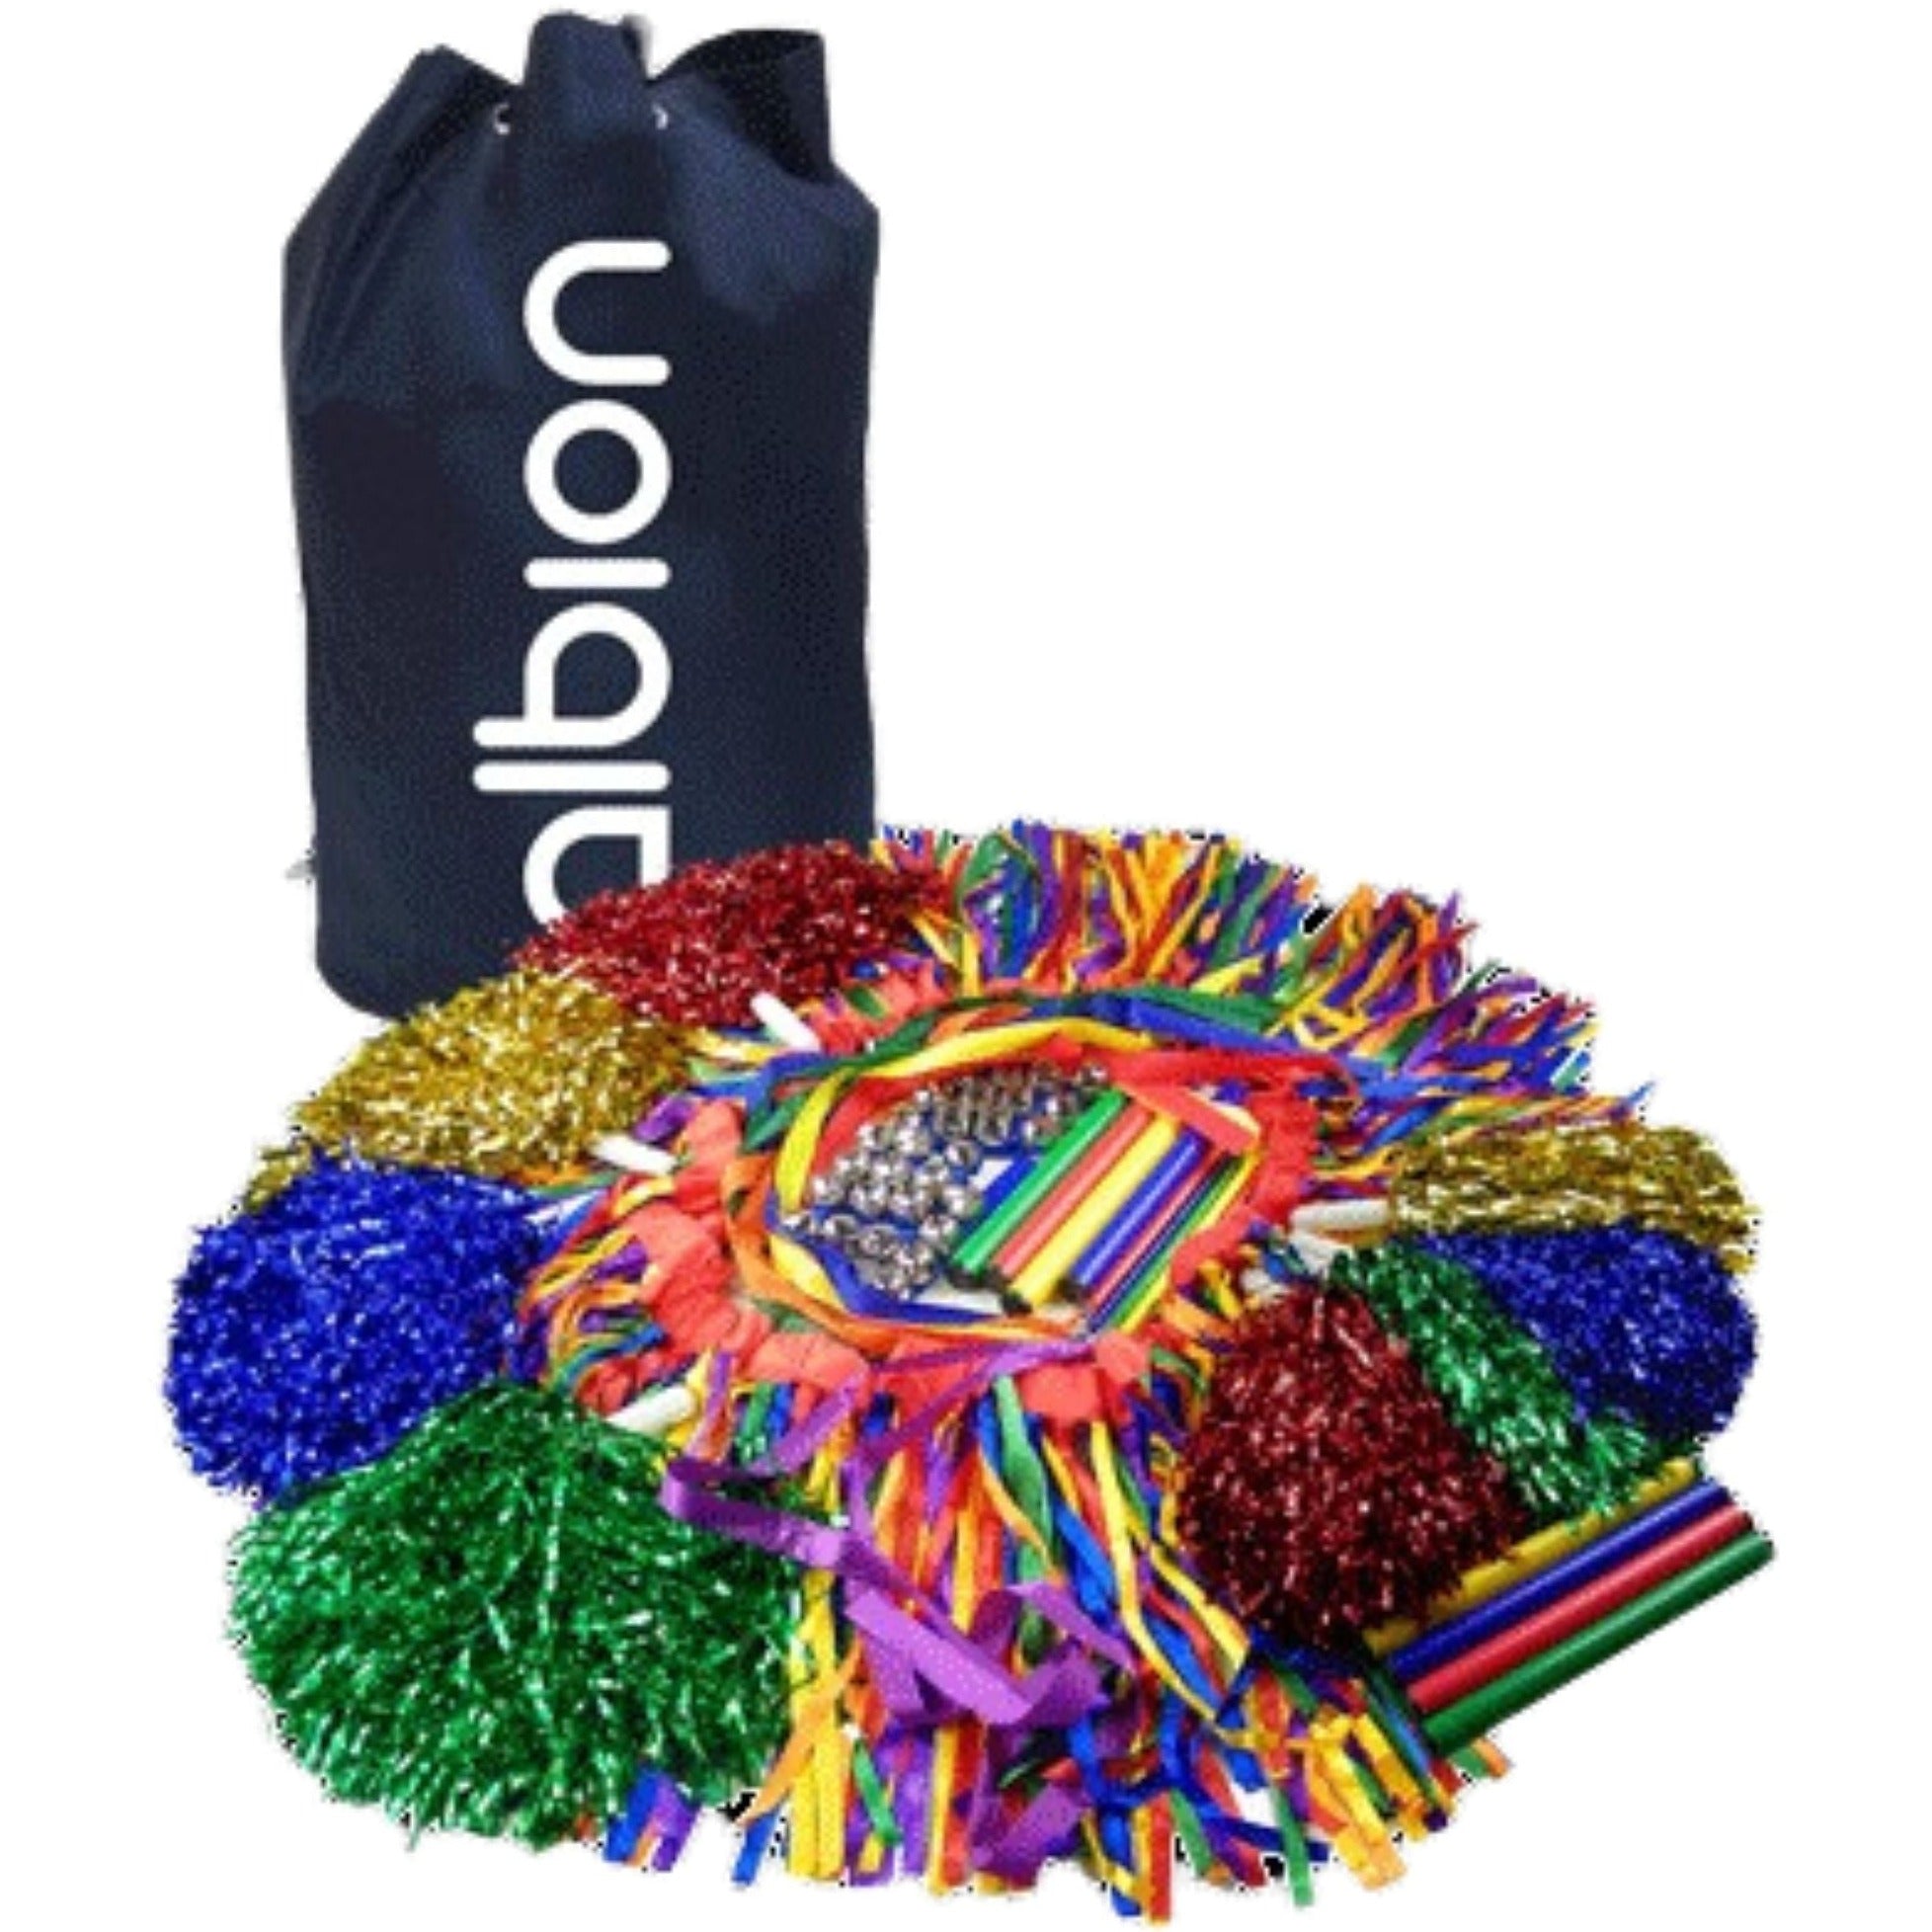 GetSetGo Dance and Movement Pack, The Dance and Movement Equipment Set is the perfect choice for teachers, dance instructors, and parents looking to add some excitement to their dance and movement classes. This set includes eight jingle bands, six large dance scarves, six ribbons and wands, 20 ribbon wristbands, eight pom-poms, and eight tap sticks. Each piece is specially selected to provide both visual and sound effects to engage, stimulate, and challenge young learners.The jingle bands are made of durabl